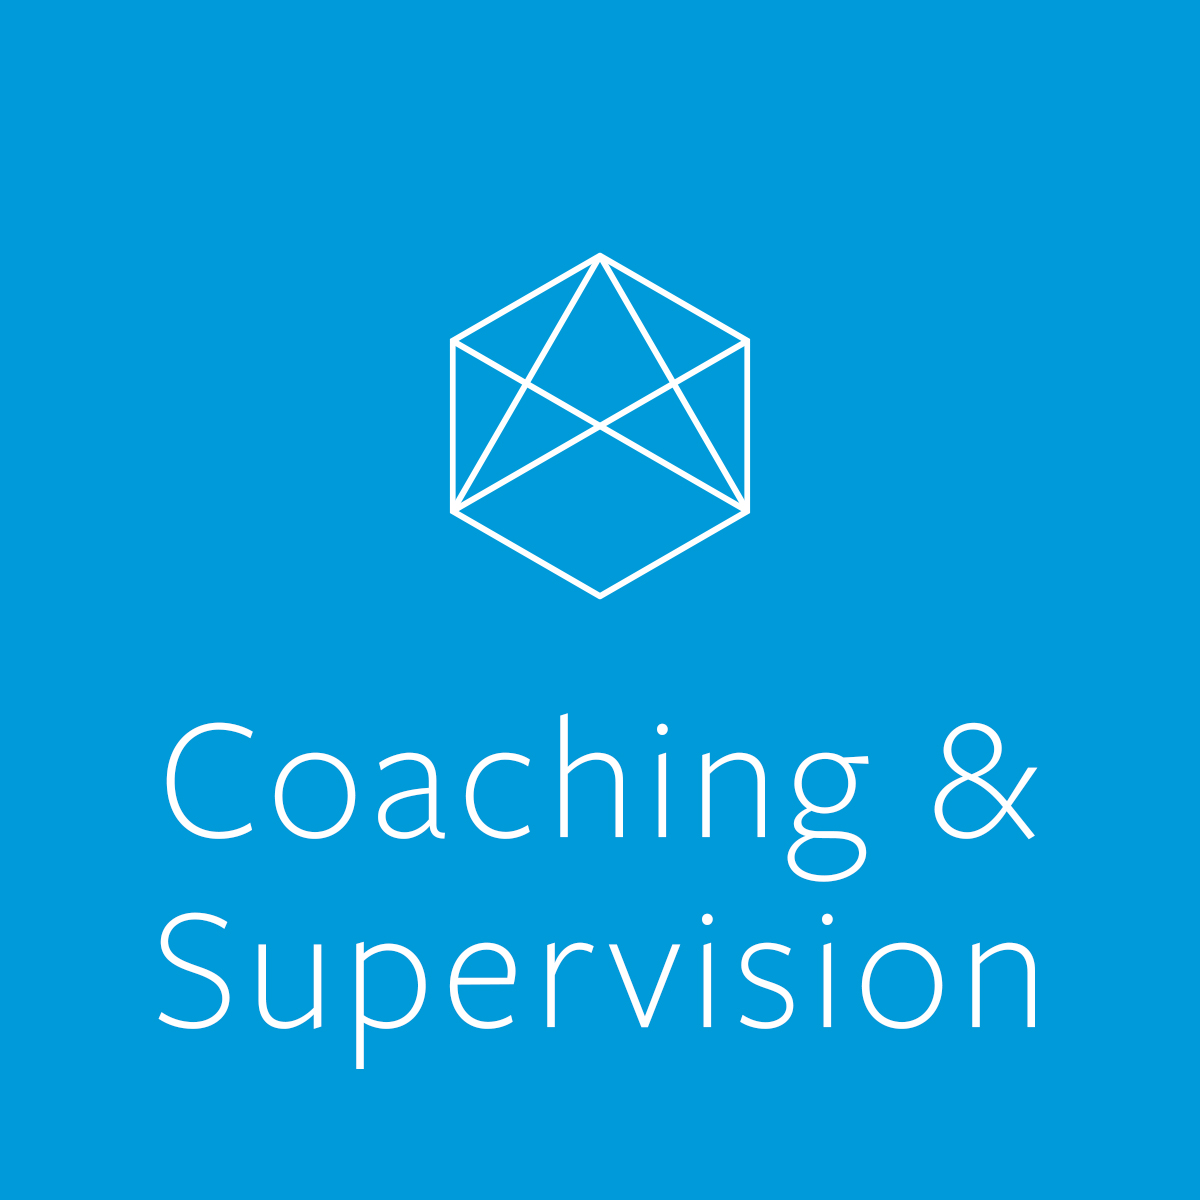 Coaching & Supervision